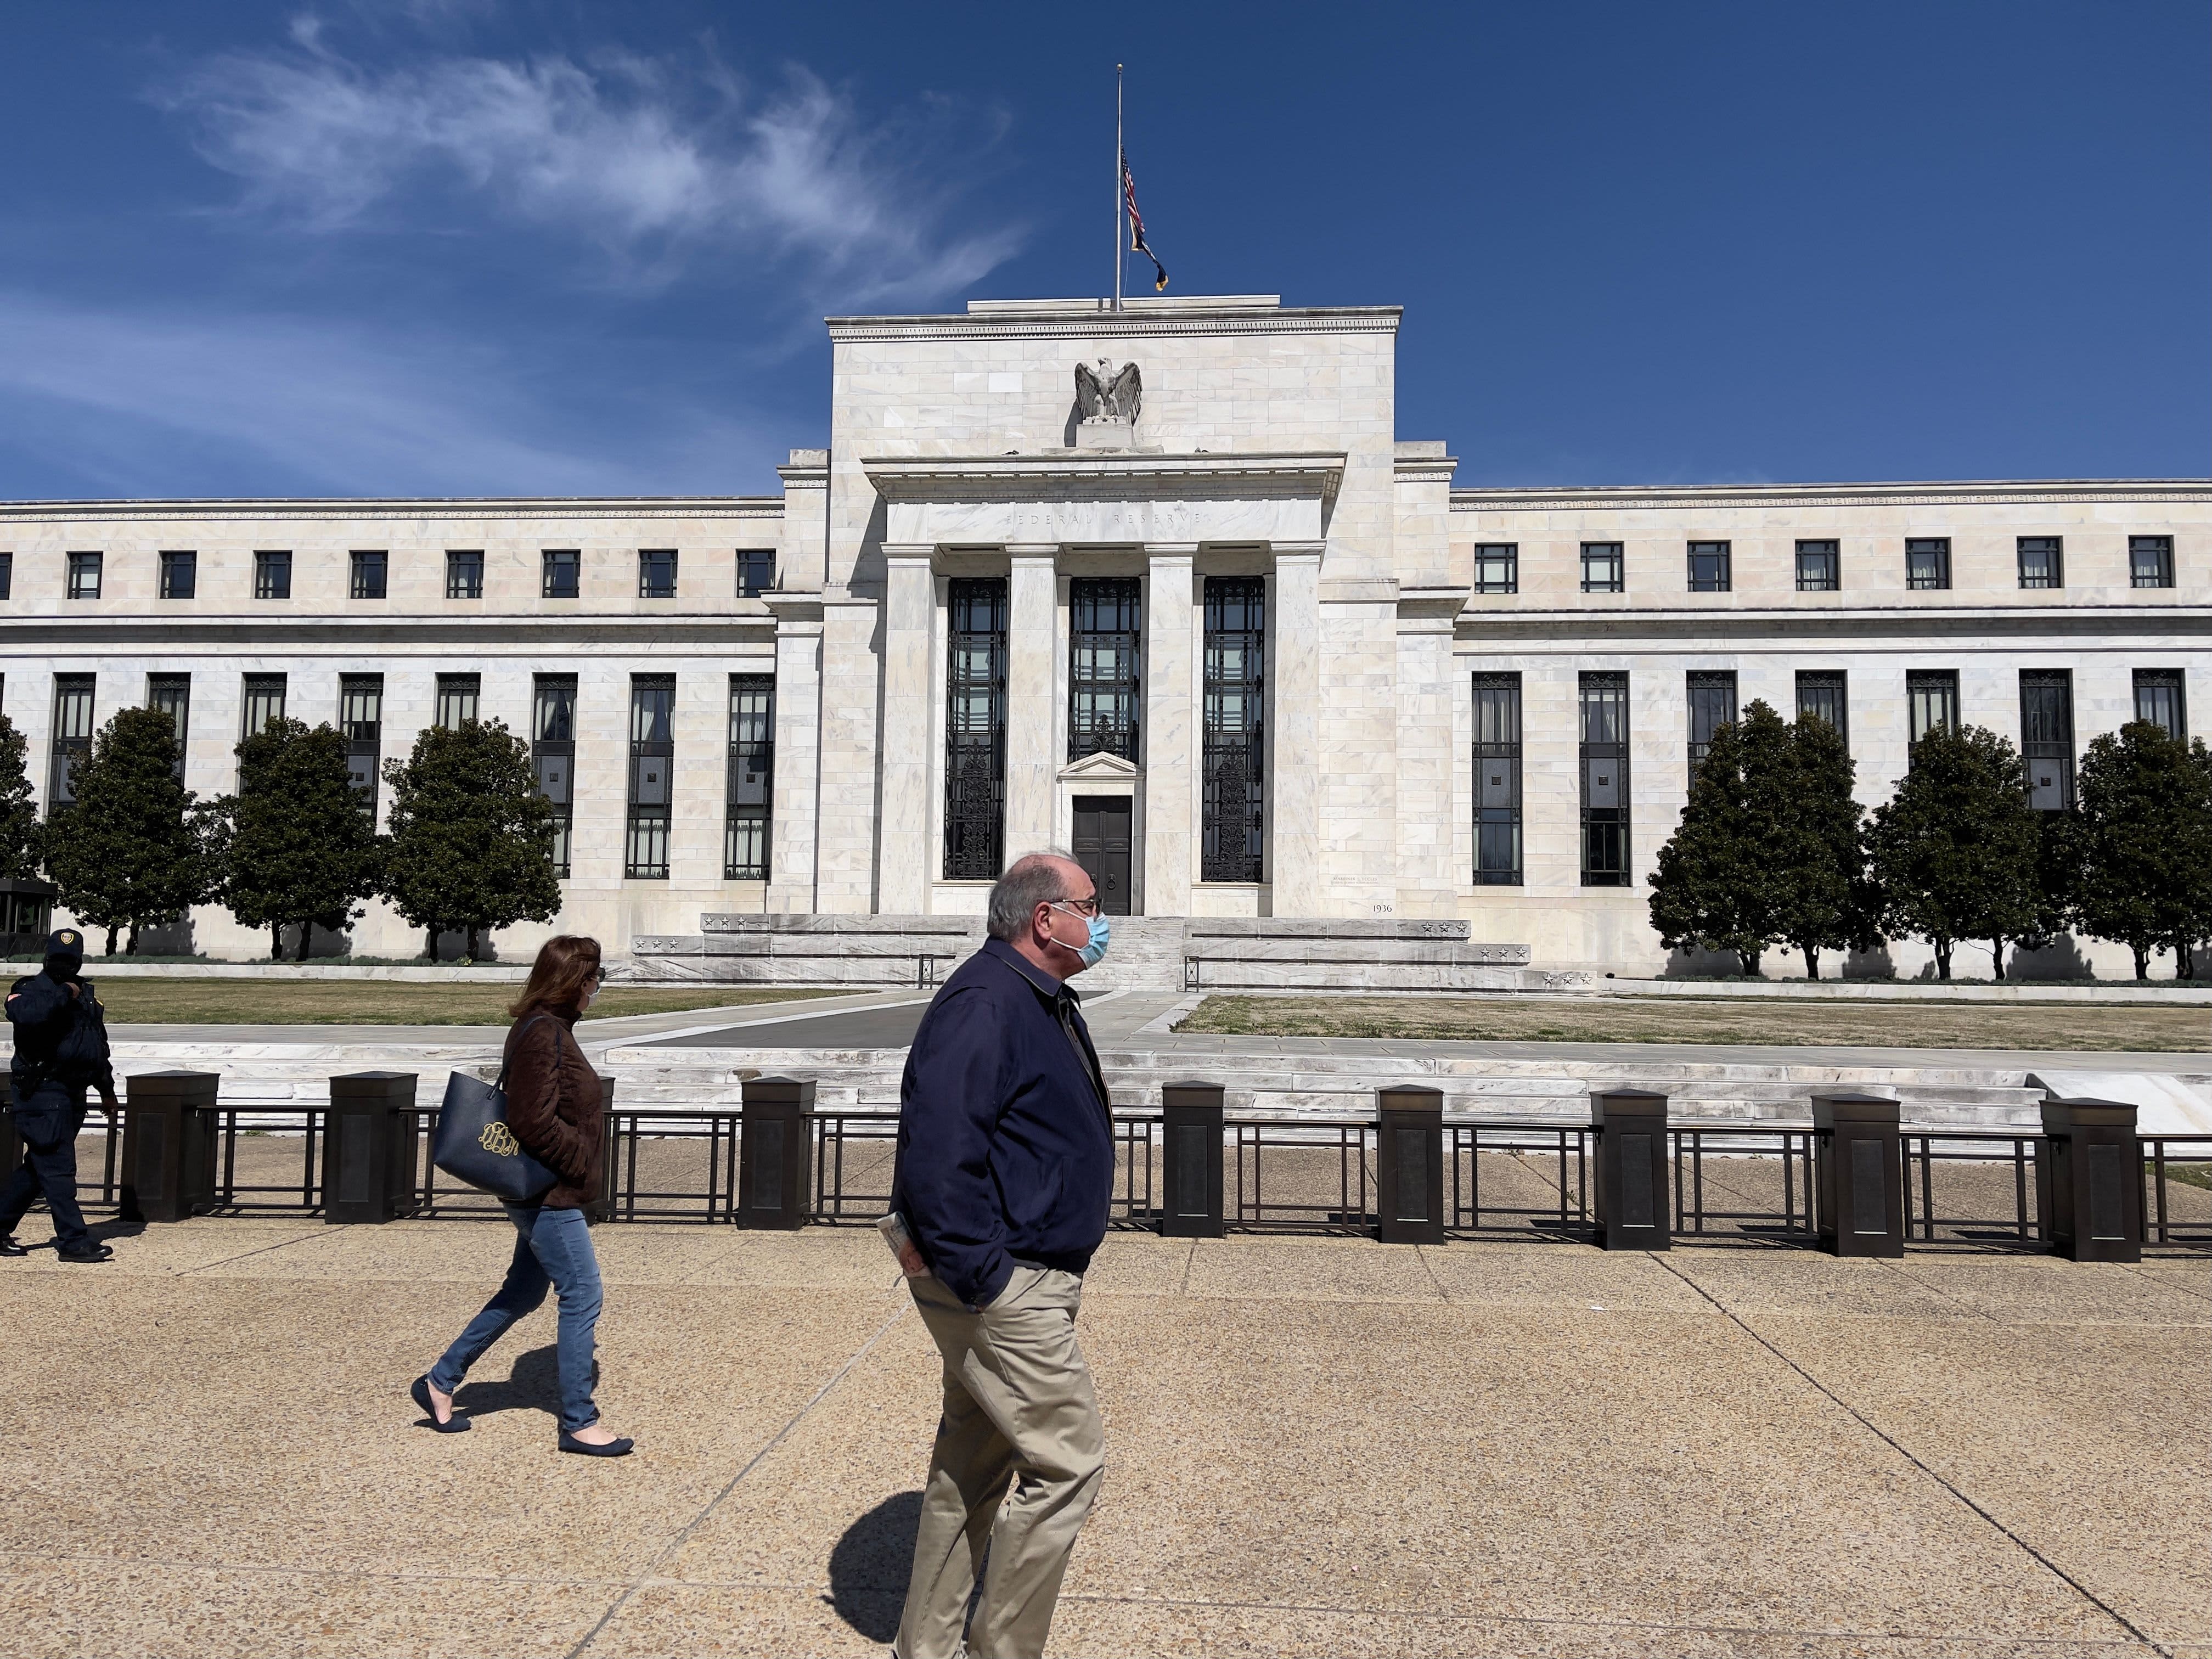 Here’s what the Fed’s expected rate hike means for your wallet